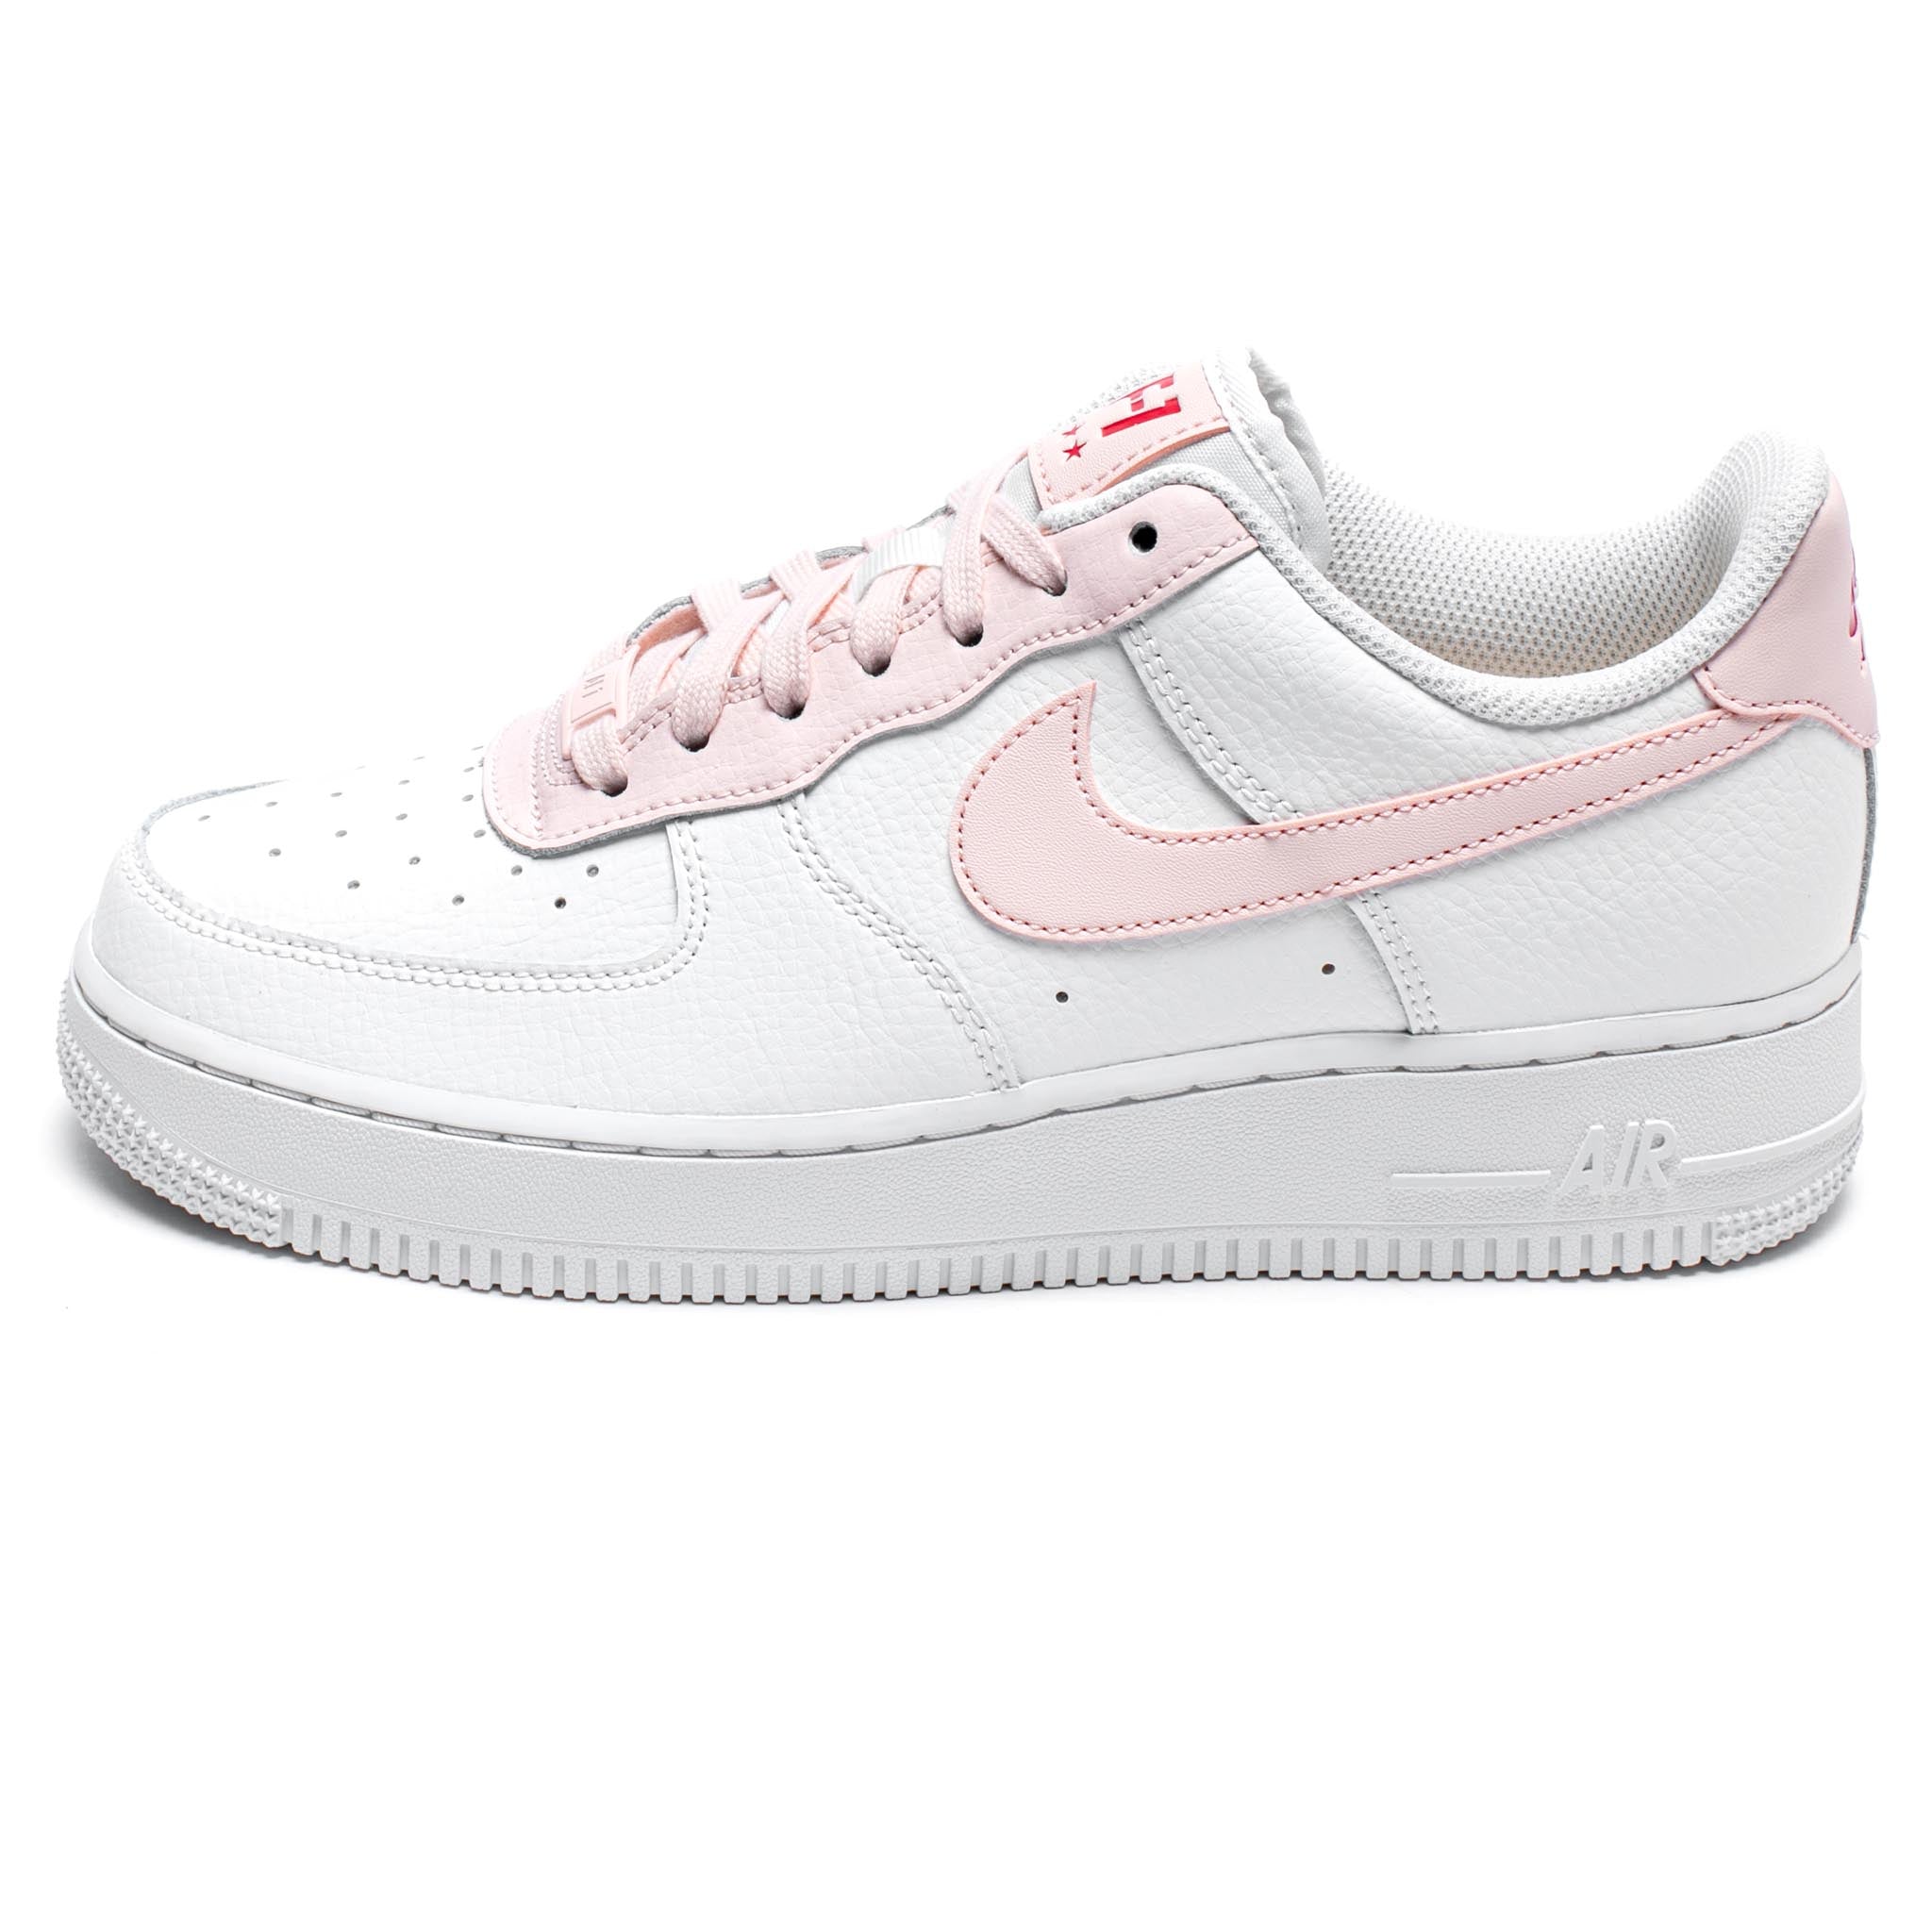 Nike Air Force 1 '07 Low 'Pale Coral'